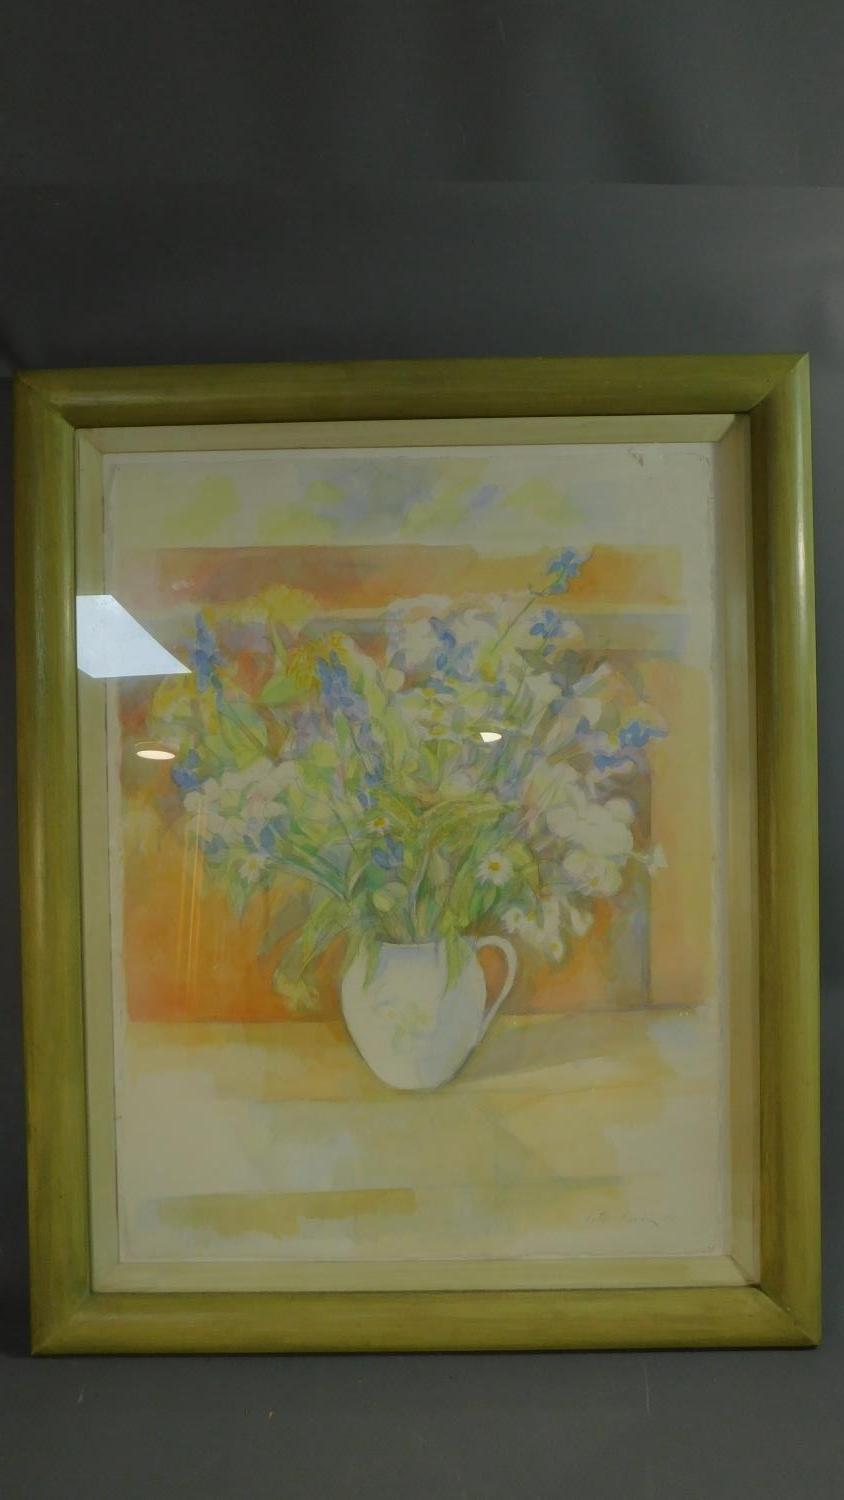 Peter Fleming, large 20th century still life of flowers, pencil and watercolour, signed and dated '